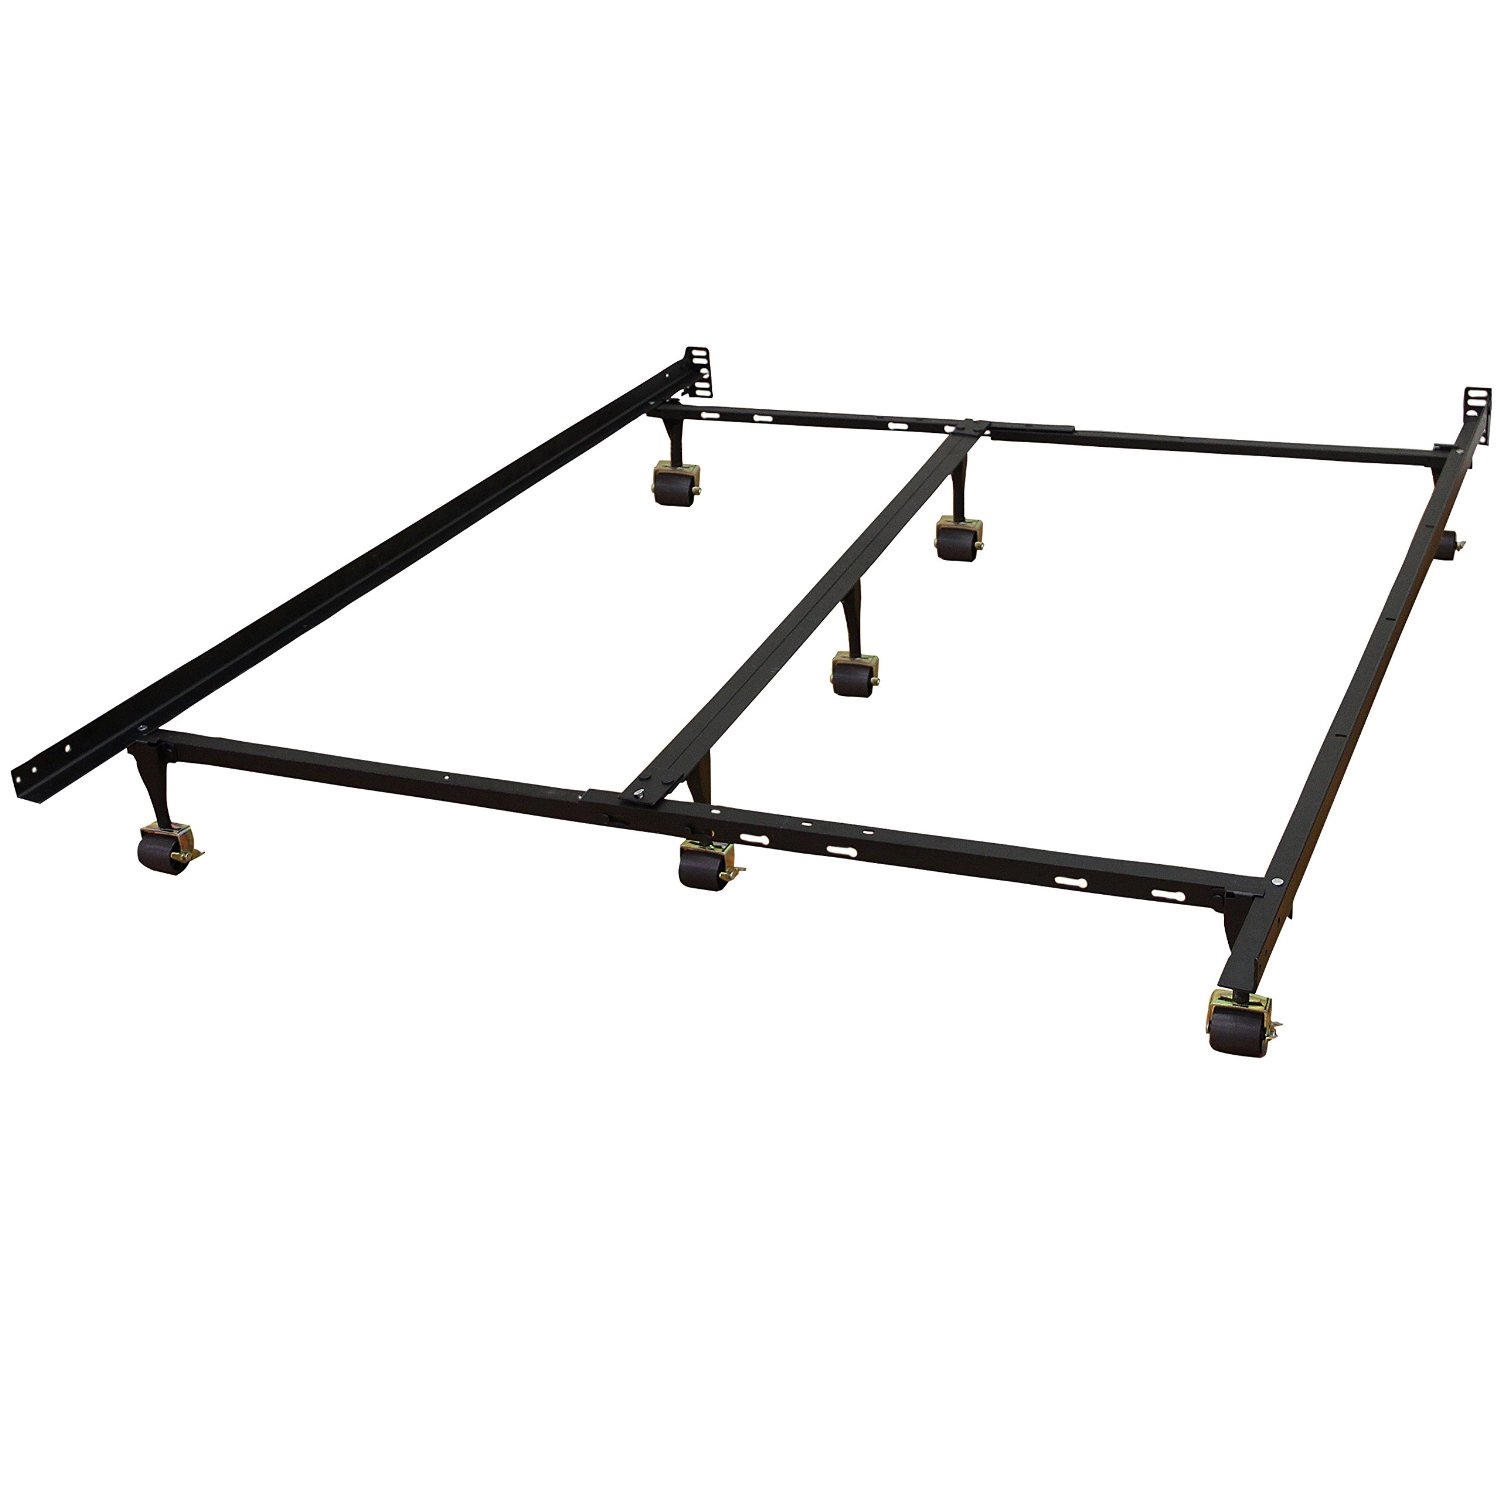 Universal Metal Bed Frame Adjusts to fit Twin Full Queen King CAL King Twin XL